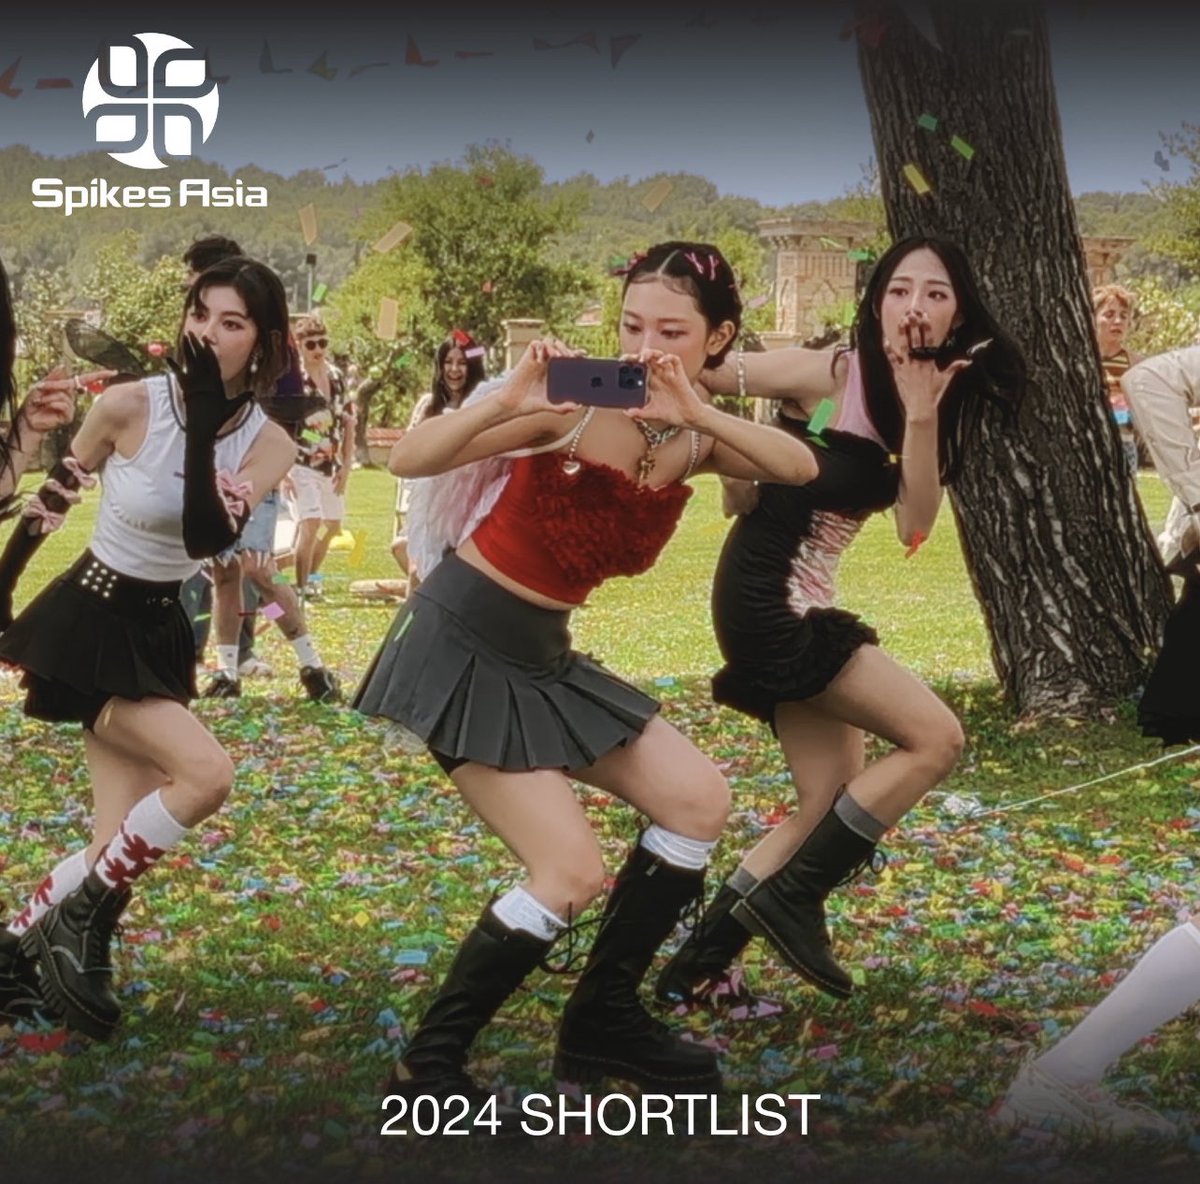 [🏆] @NewJeans_ADOR also made the Shortlist in multiple categories at the #SpikesAsia2024 Awards, alongside being named a ‘Bronze Winner’ for their ‘ETA’ Music Video

‘Cola-Cola Massita with #NewJeans’ 
Category: Partnerships in Talent / Brand or Product Integration into Music…